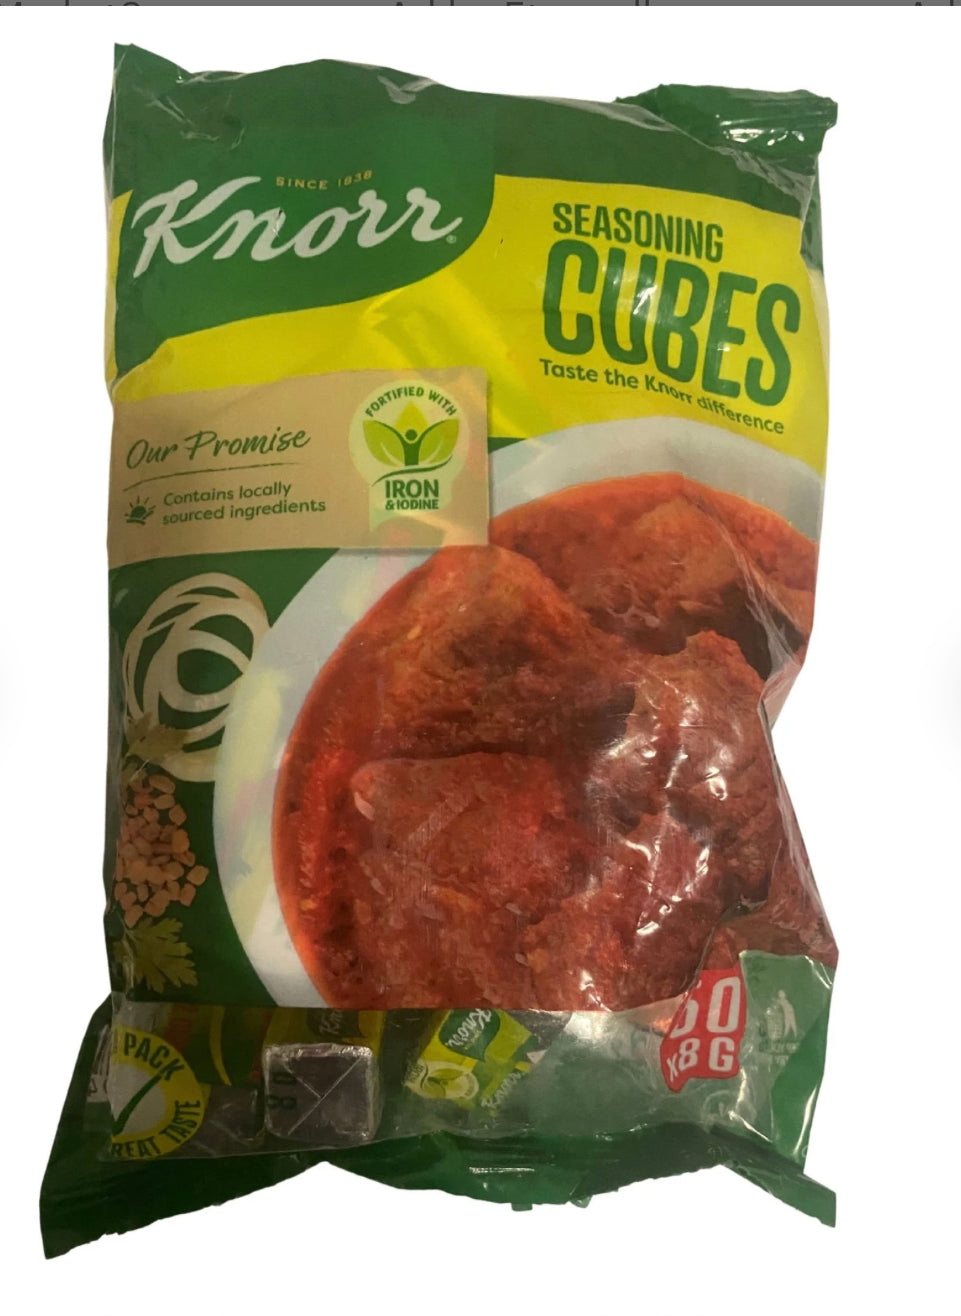 Knorr Beef Cubes 8g x 50 cubes